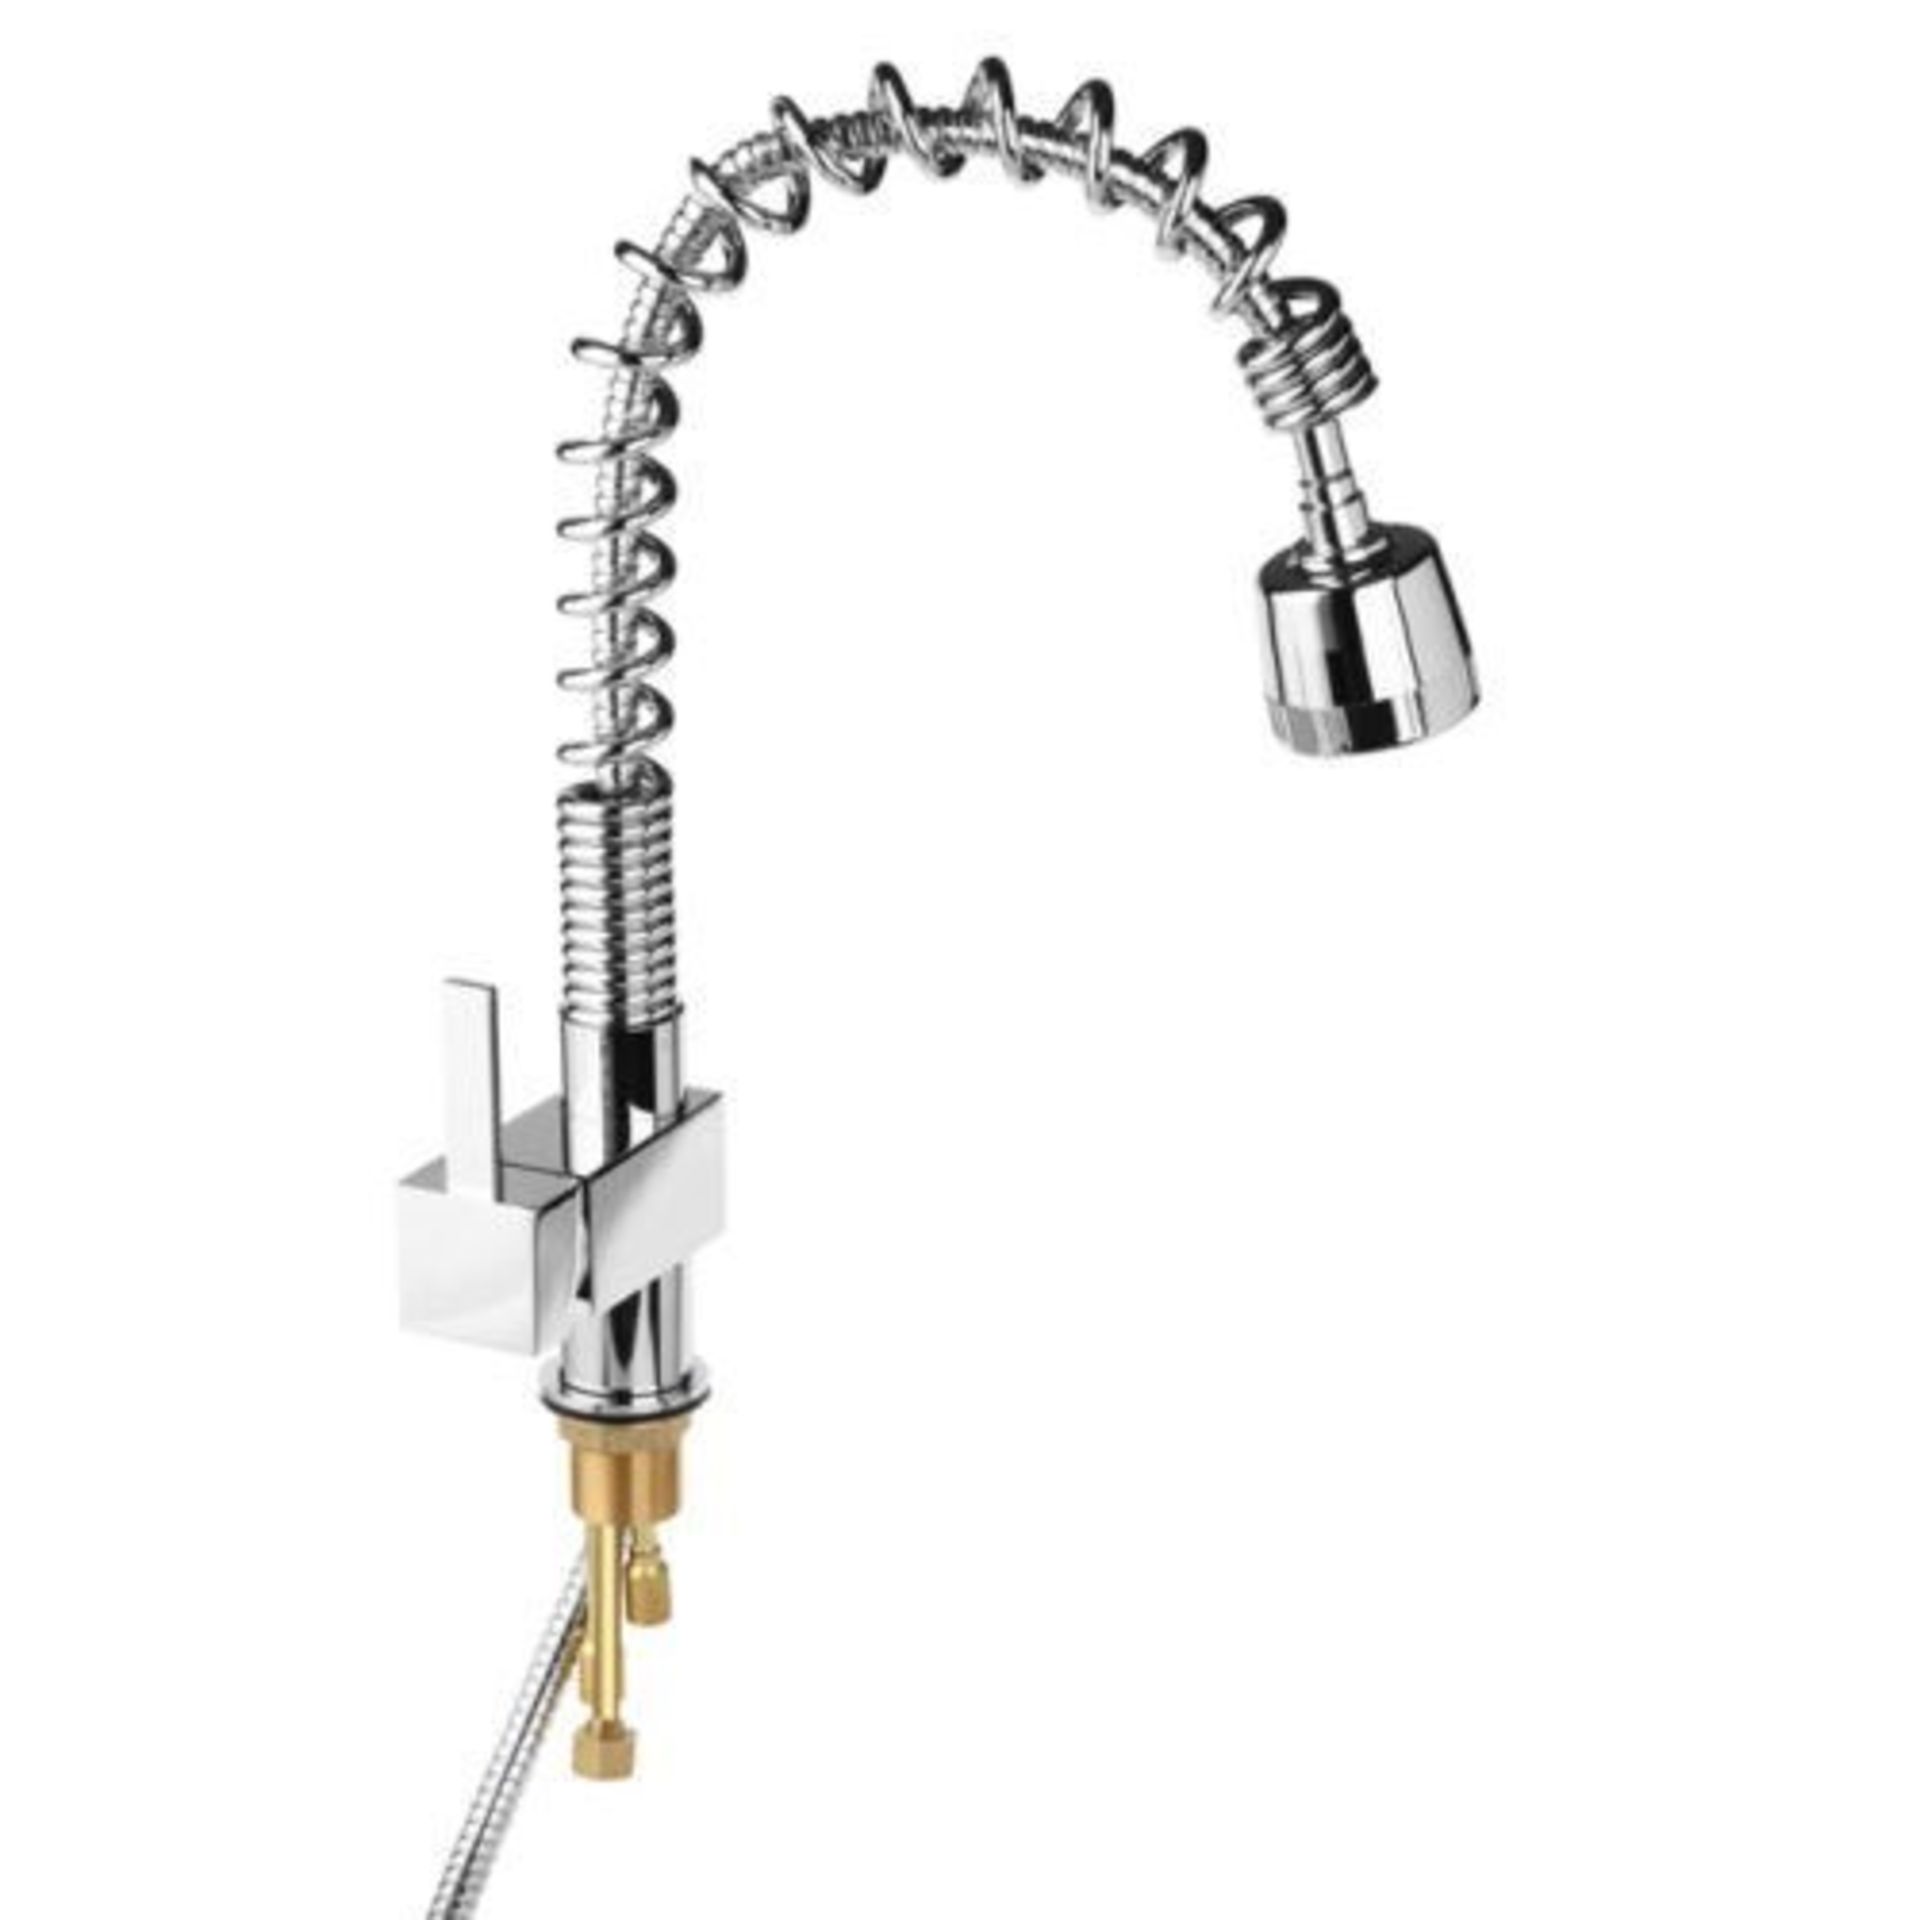 BRAND NEW BOXED Maddie Brushed Chrome Monobloc Kitchen Tap Swivel Pull Out Spray Mixer.RRP £219.99. - Image 2 of 2